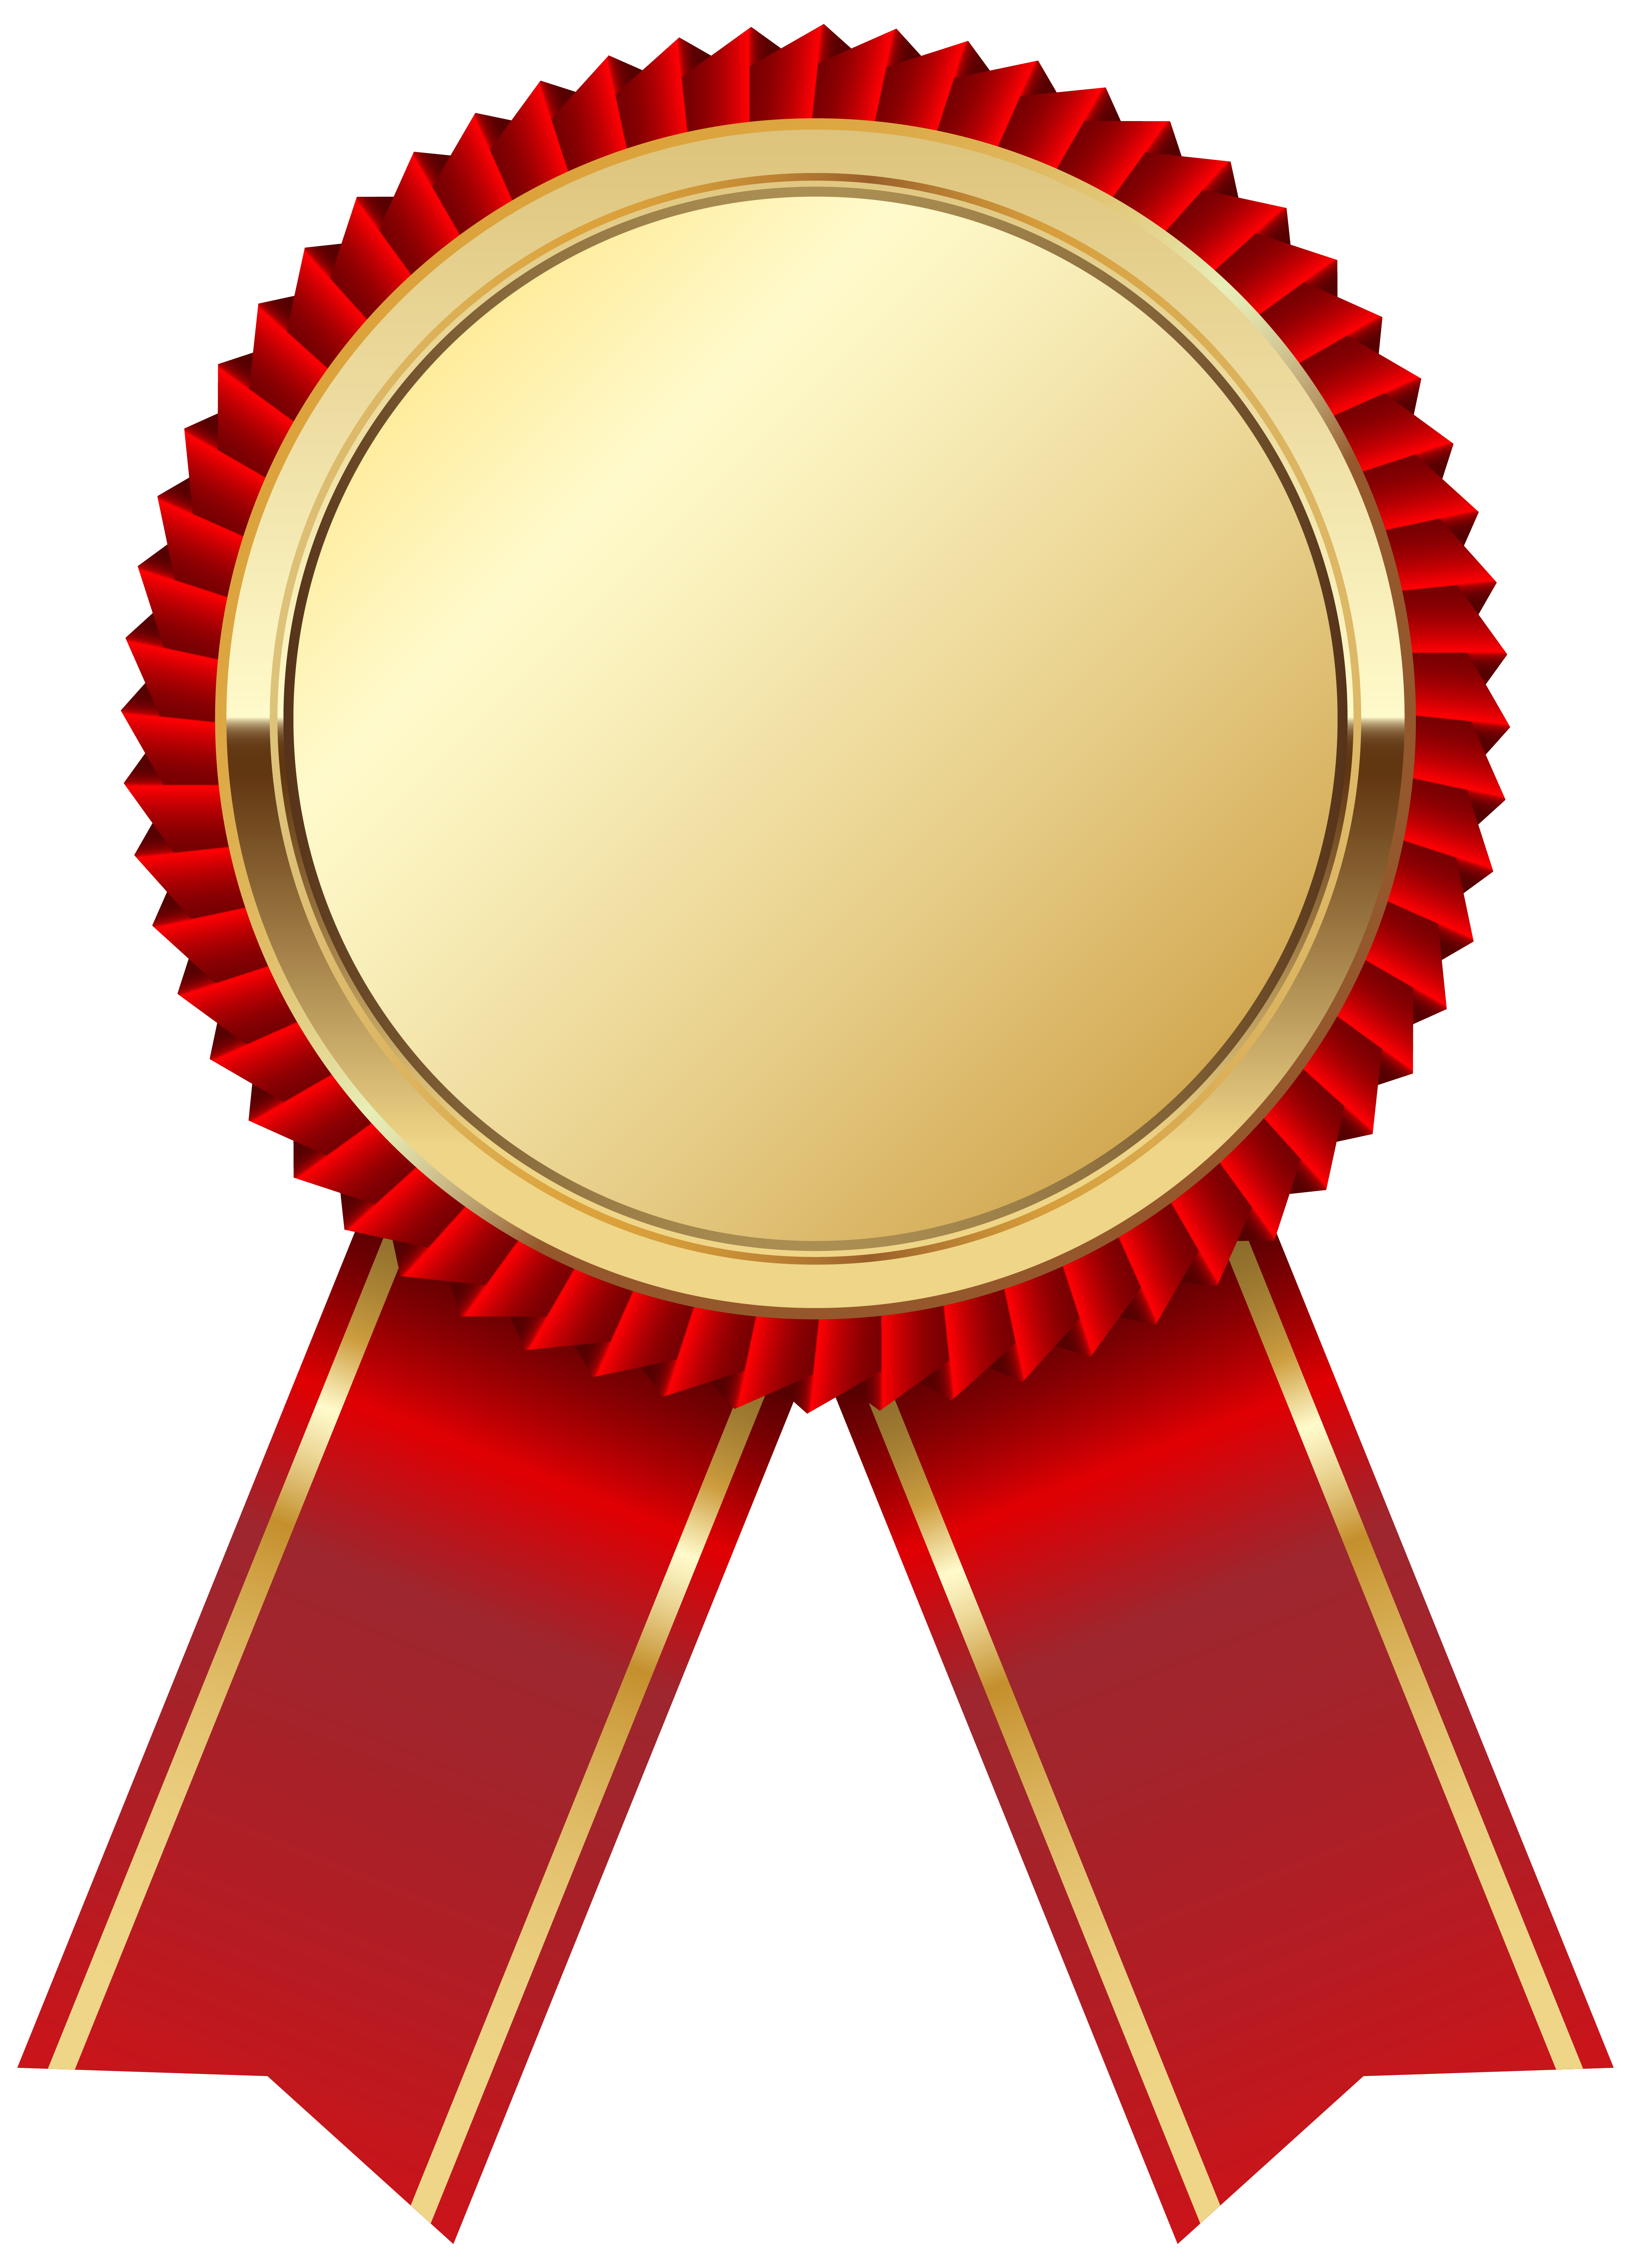 free clipart gold medals - photo #35